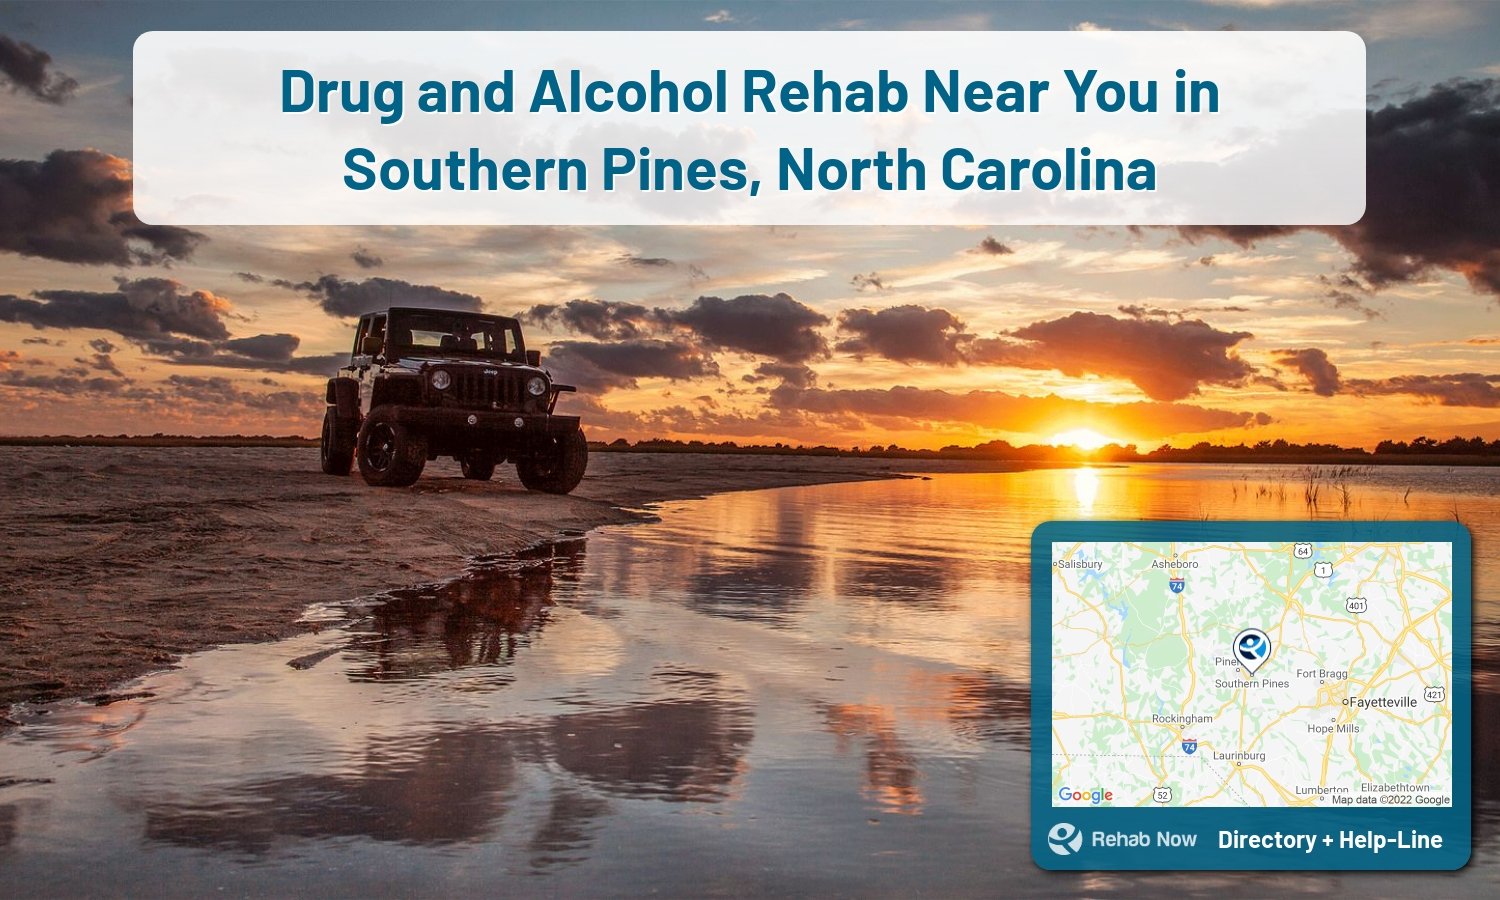 View options, availability, treatment methods, and more, for drug rehab and alcohol treatment in Southern Pines, North Carolina